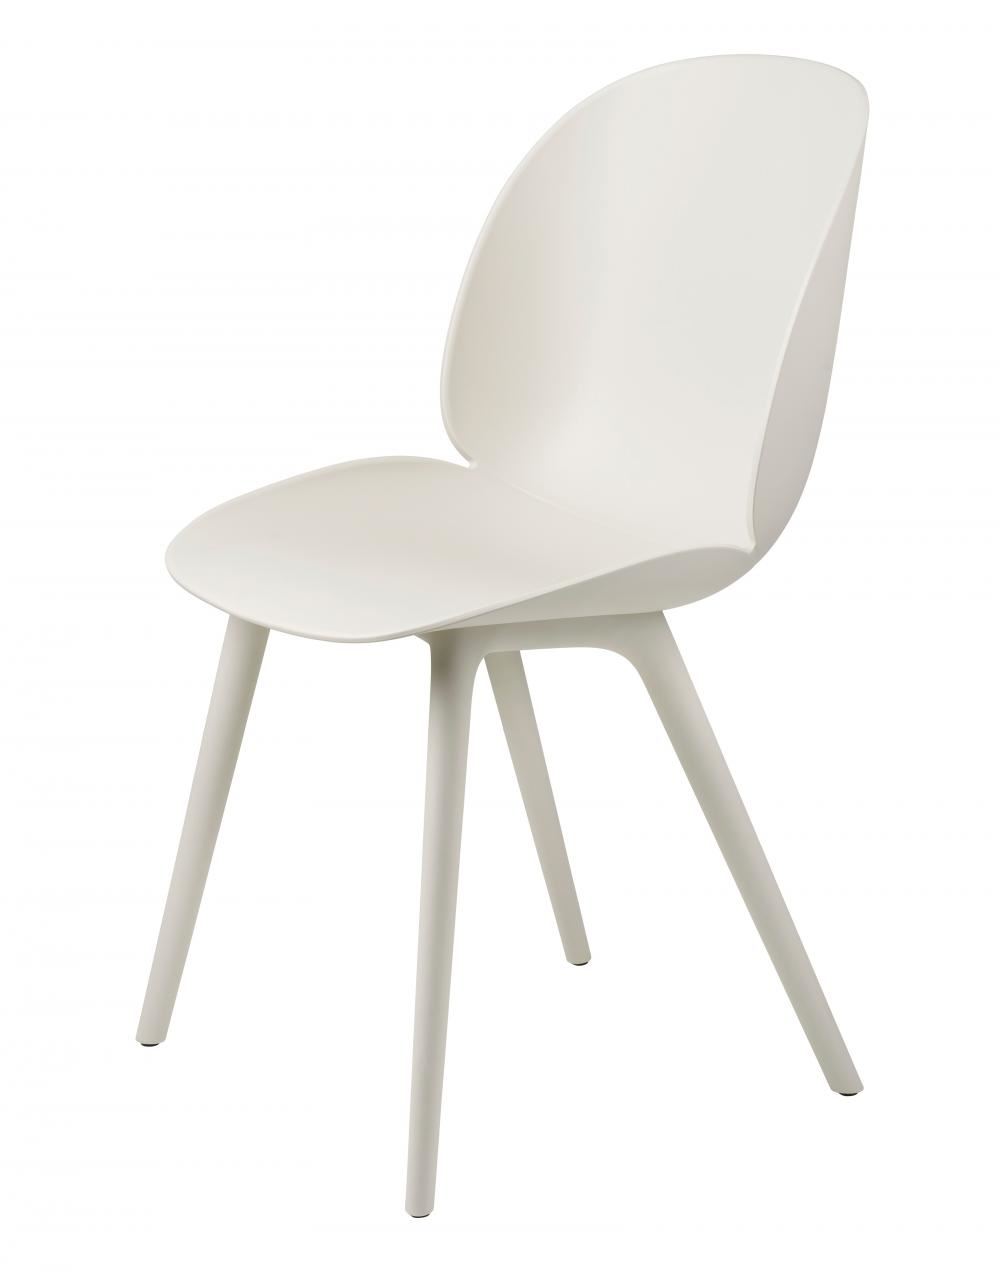 Beetle Outdoor Dining Chair Alabaster White